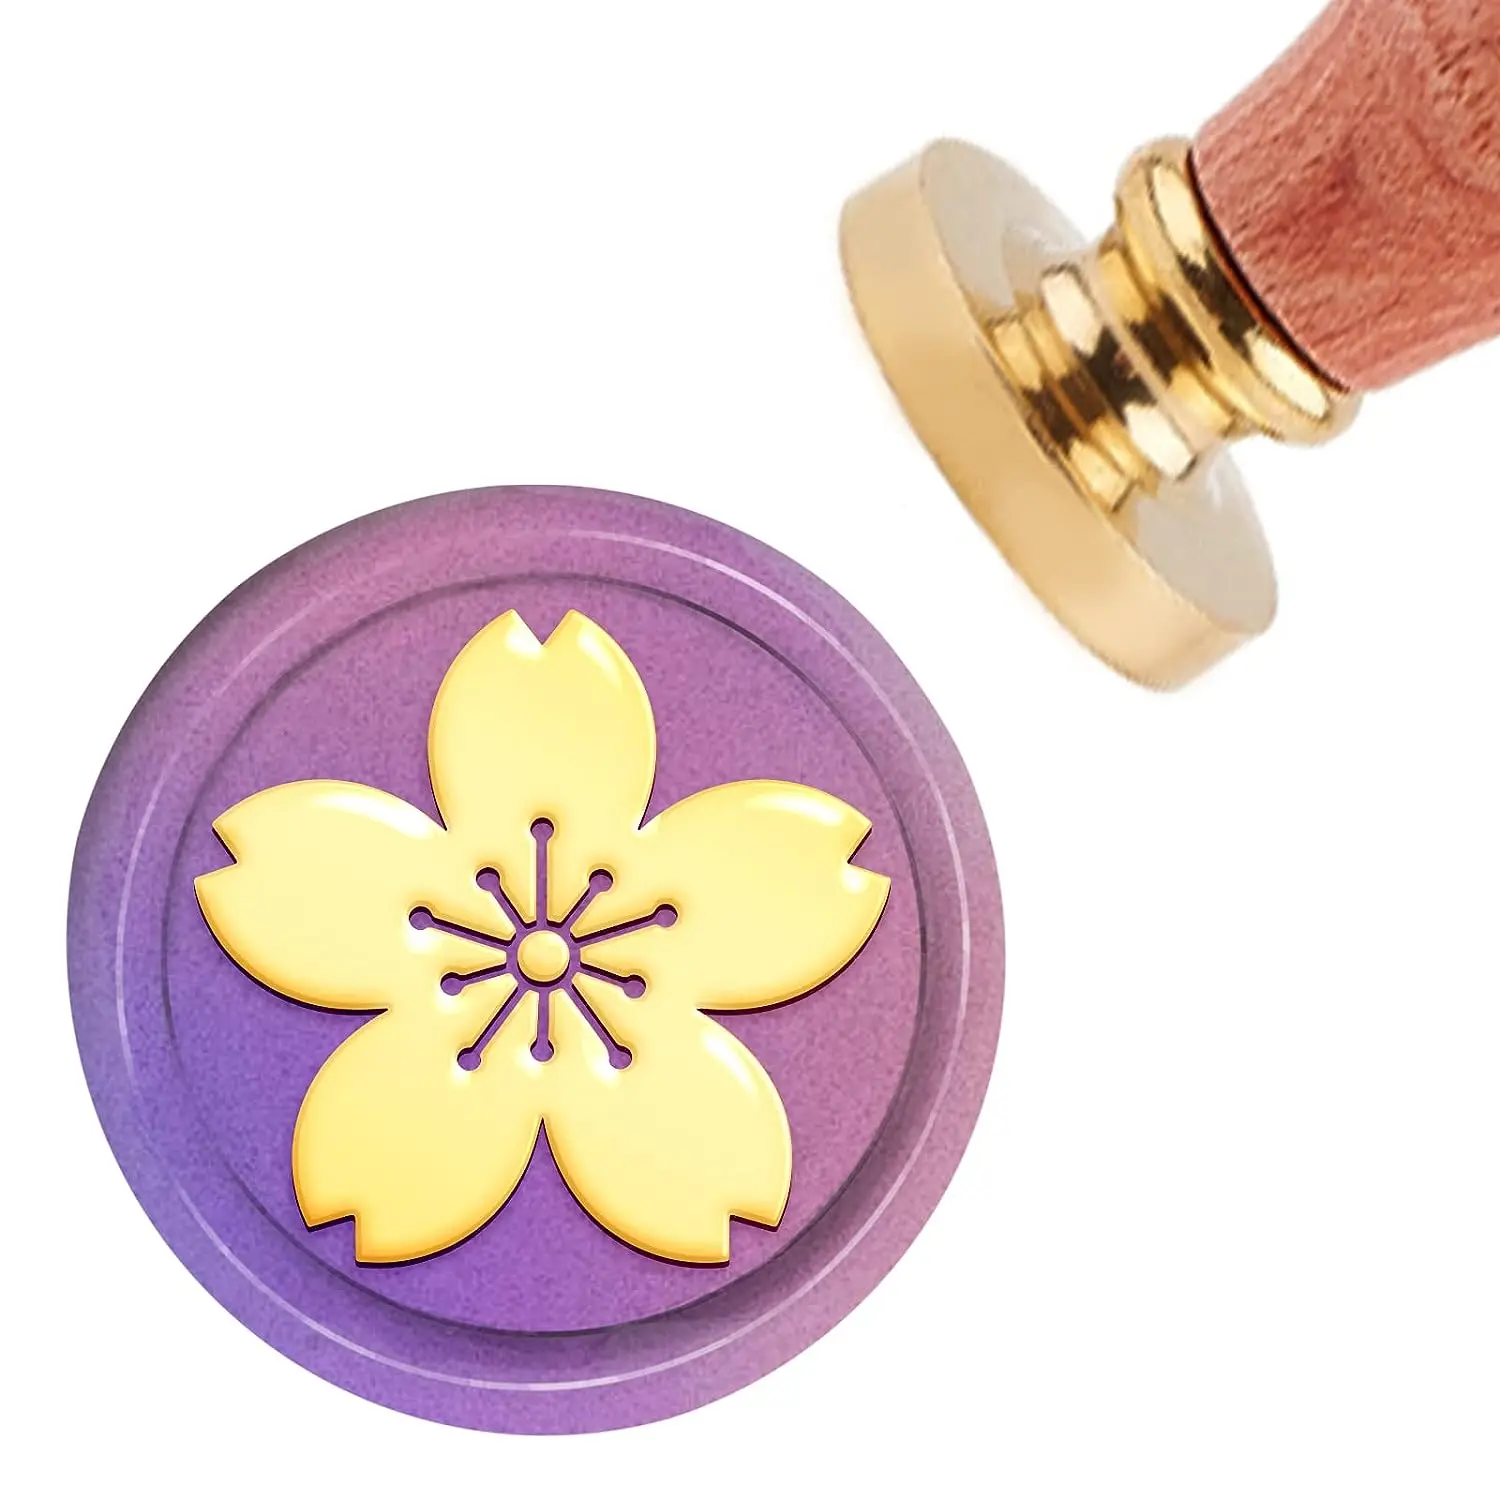 

1PC Wax Seal Stamp Cherry Blossom Vintage Sealing Wax Stamps Flower 30mm Removable Brass Head Sealing Stamp with Wooden Handle